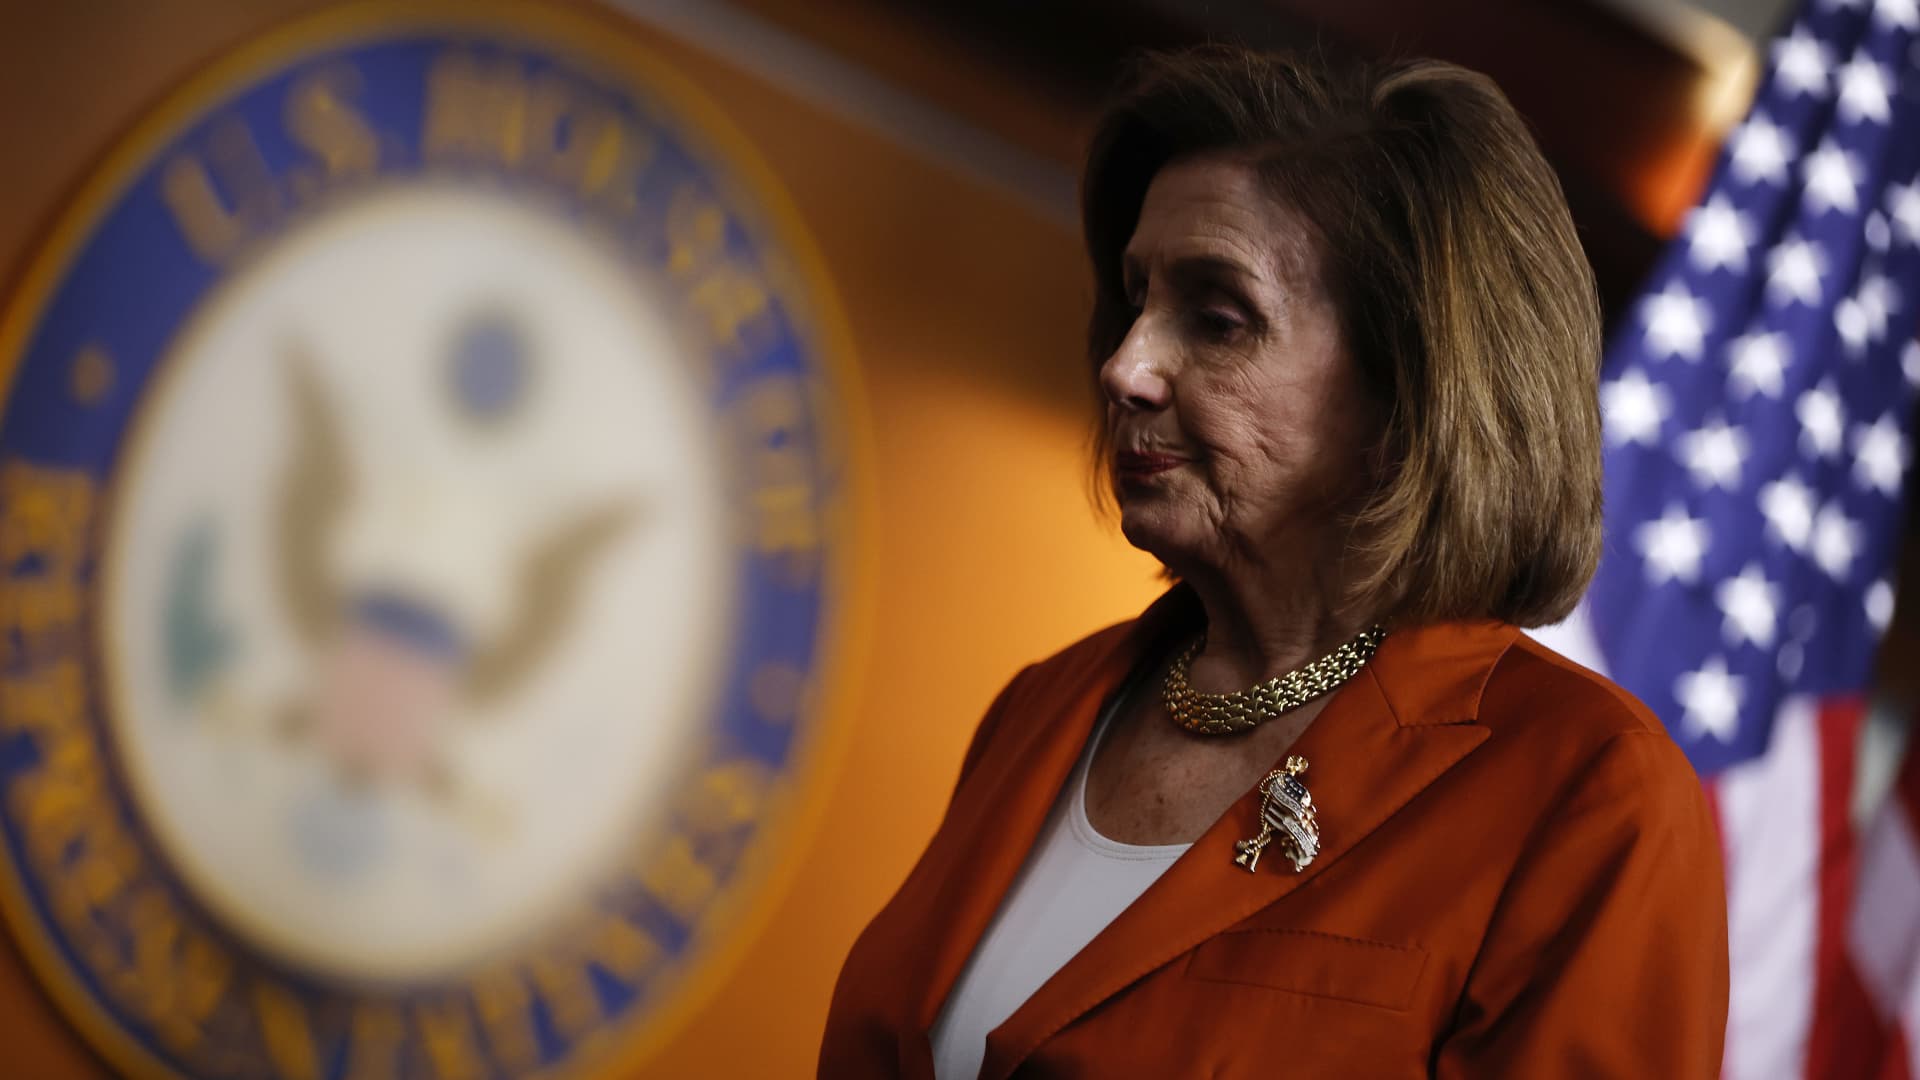 Pelosi says Democrats are mulling plans to protect abortion access data stored in reproductive health apps – CNBC